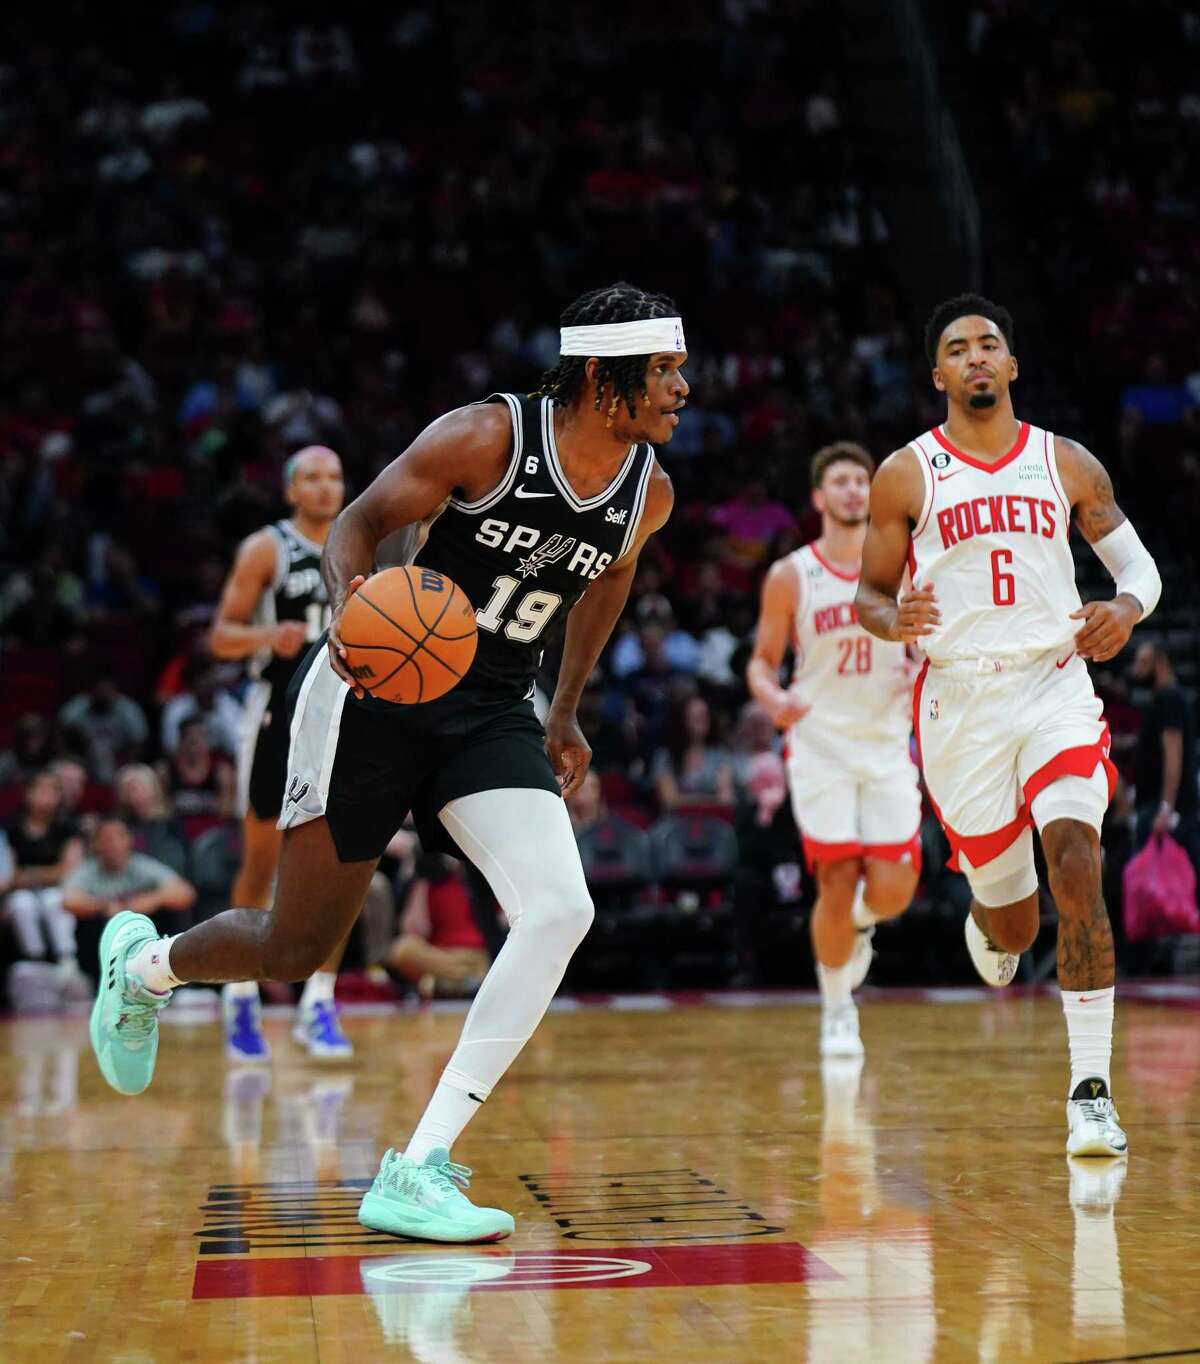 After a productive stint in Austin, Alize Johnson will give the Spurs a boost with frontcourt players Jakob Poeltl and Jeremy Sochan nursing quad injuries.